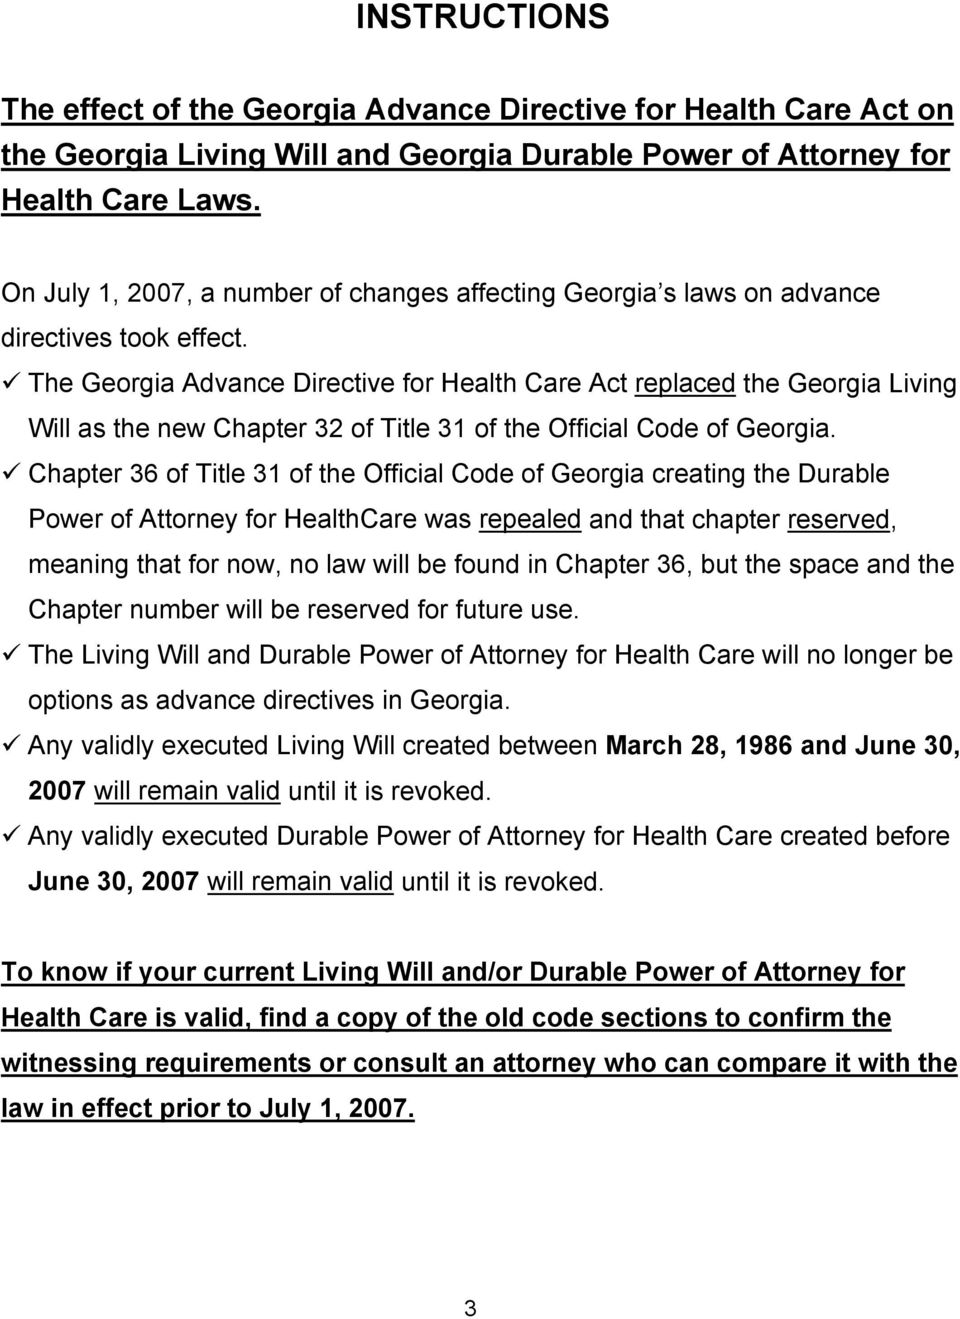 The Georgia Advance Directive for Health Care Act replaced the Georgia Living Will as the new Chapter 32 of Title 31 of the Official Code of Georgia.